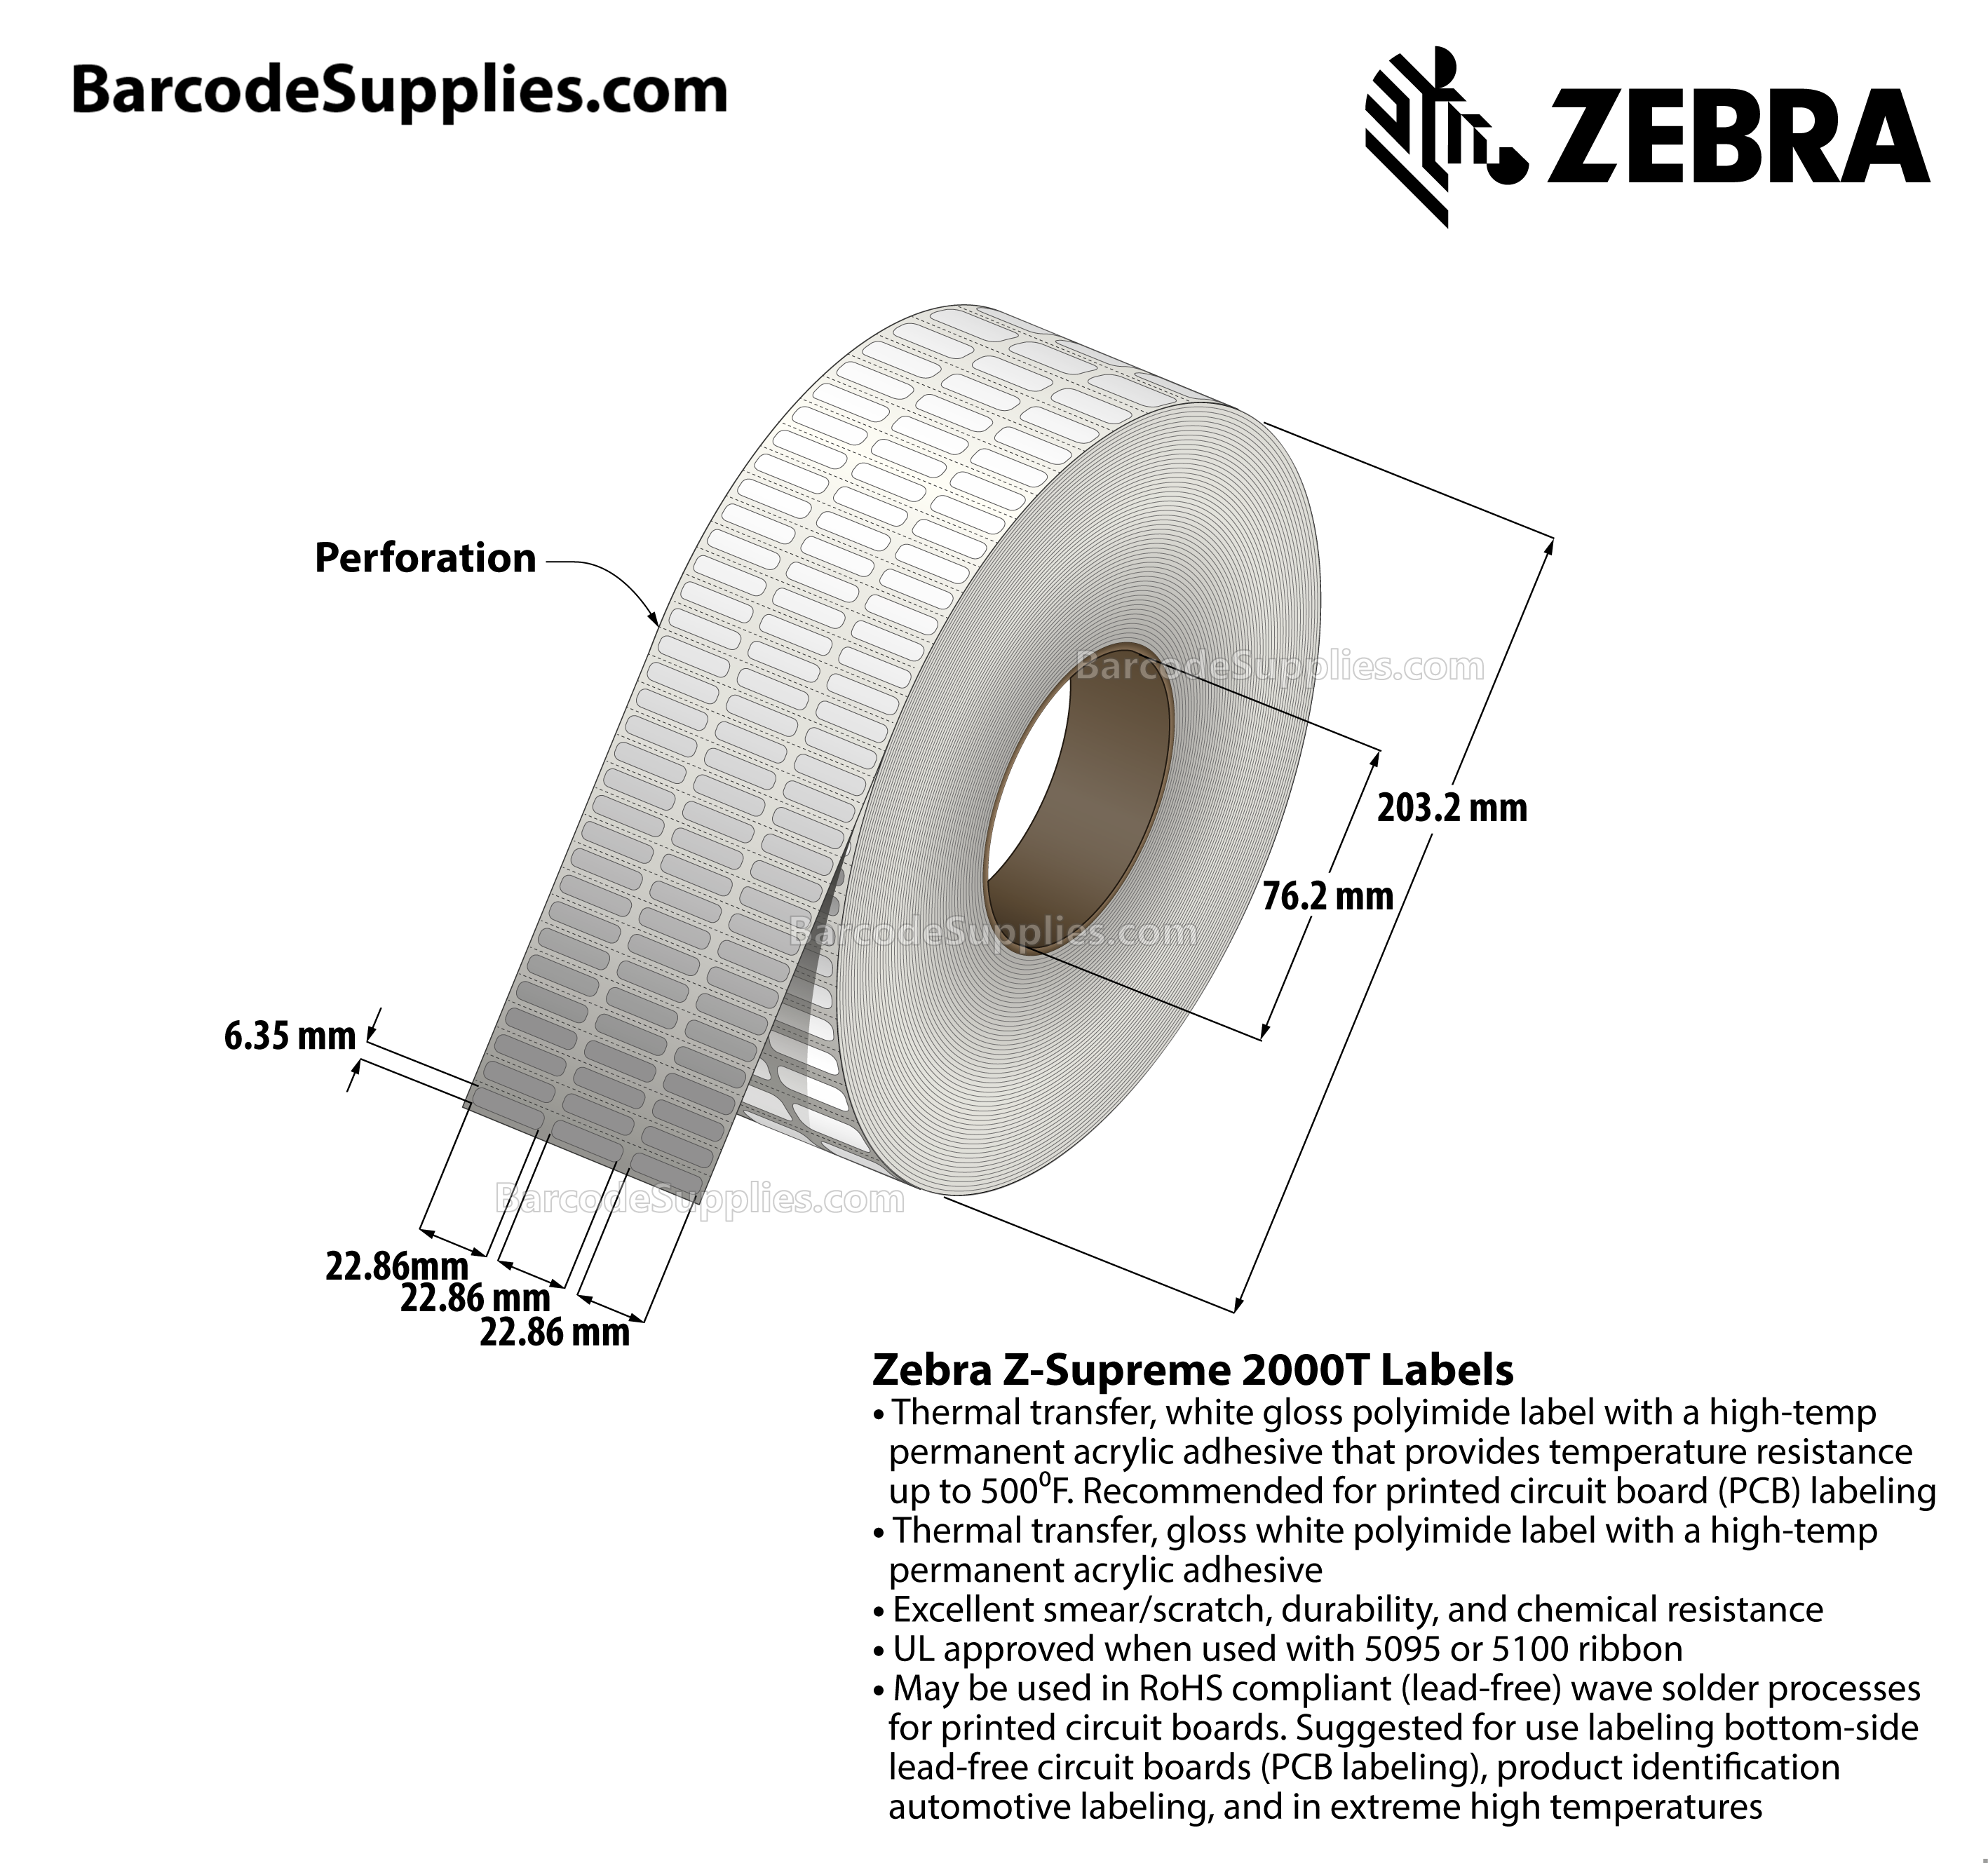 0.9 x 0.25 Thermal Transfer White Z-Supreme 2000T (3-Across) Labels With High-temp Adhesive - Perforated - 10002 Labels Per Roll - Carton Of 1 Rolls - 10002 Labels Total - MPN: 10023196